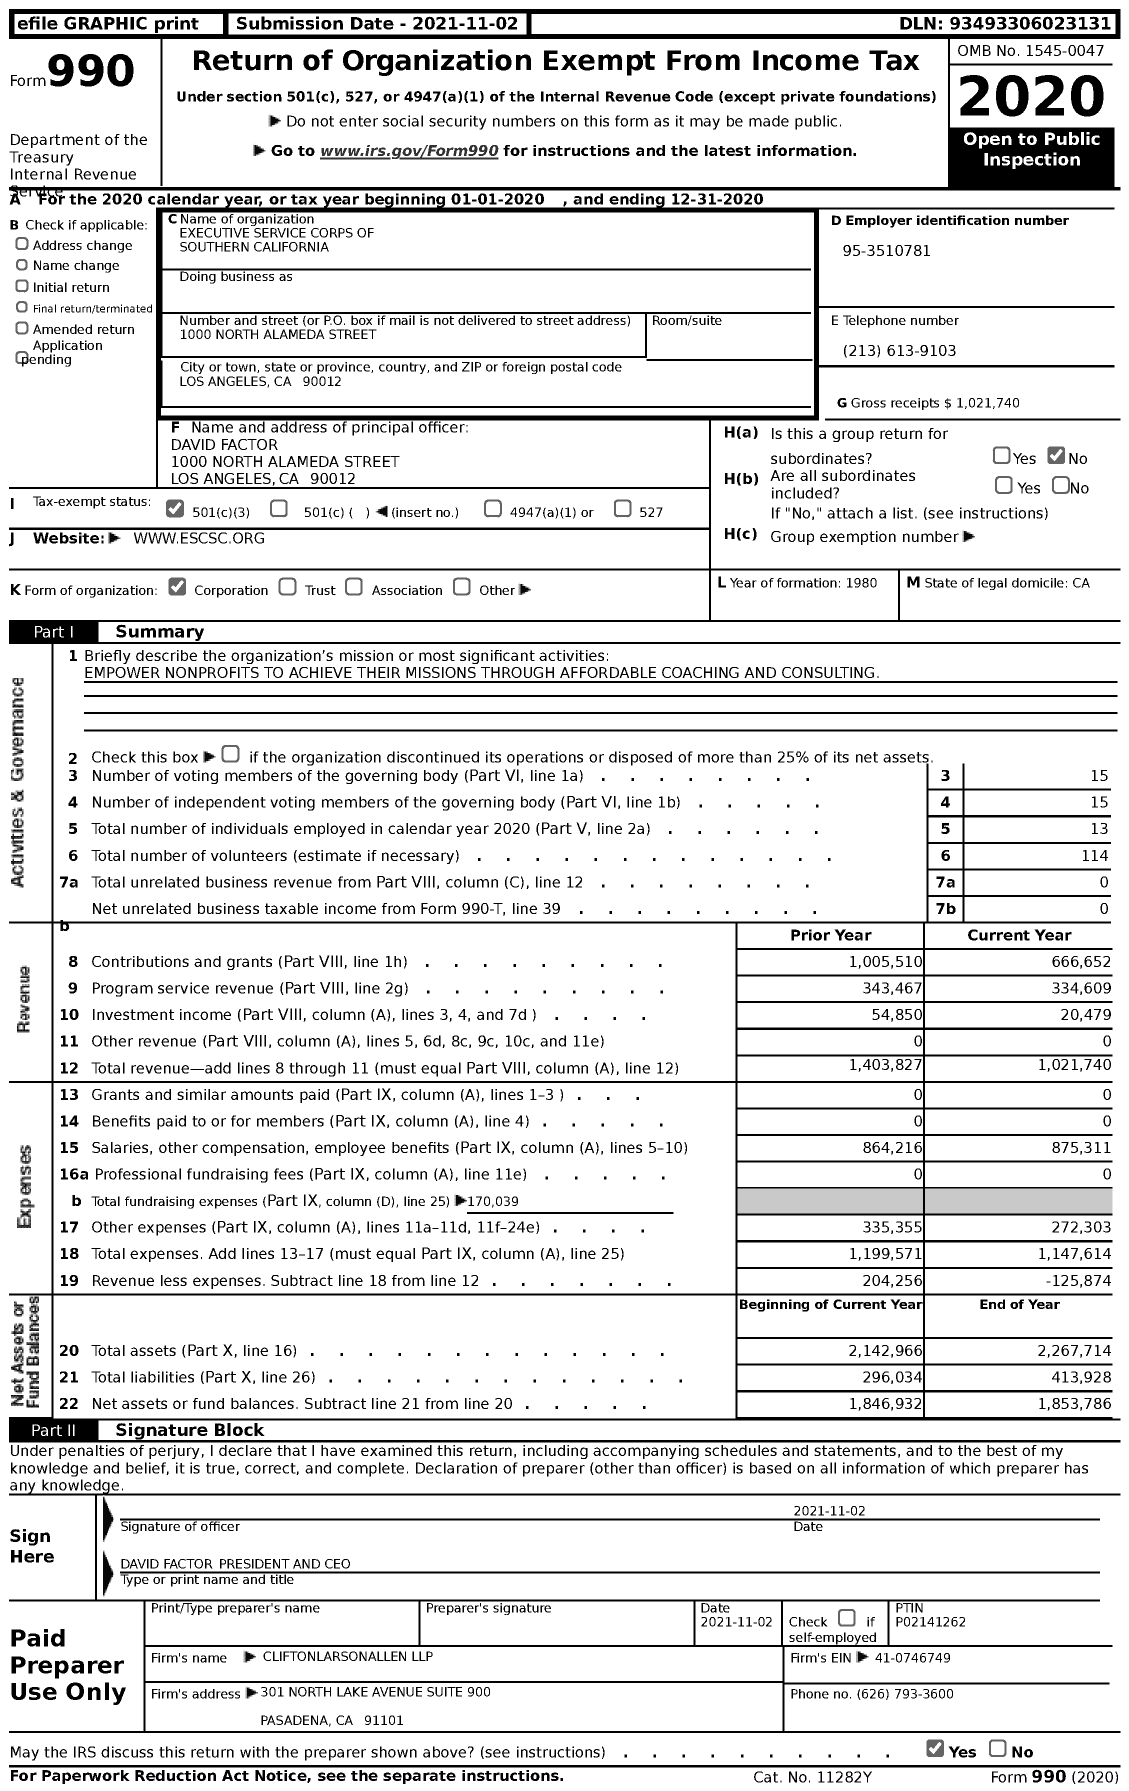 Image of first page of 2020 Form 990 for Executive Service Corps of Southern CALIFORNIA